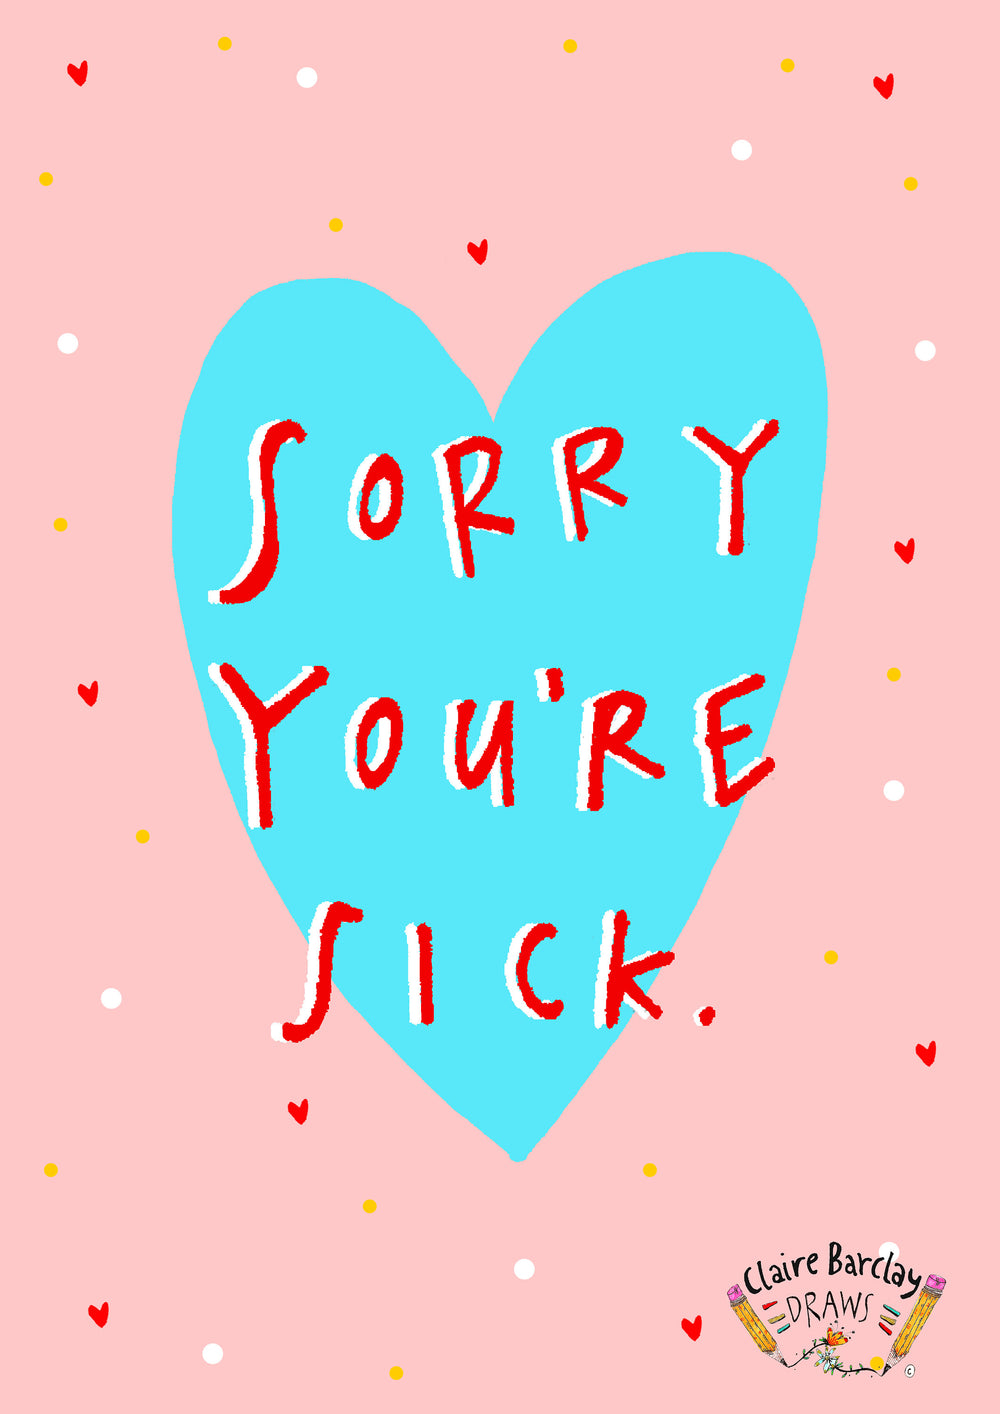 Sorry You're Sick Greetings Card